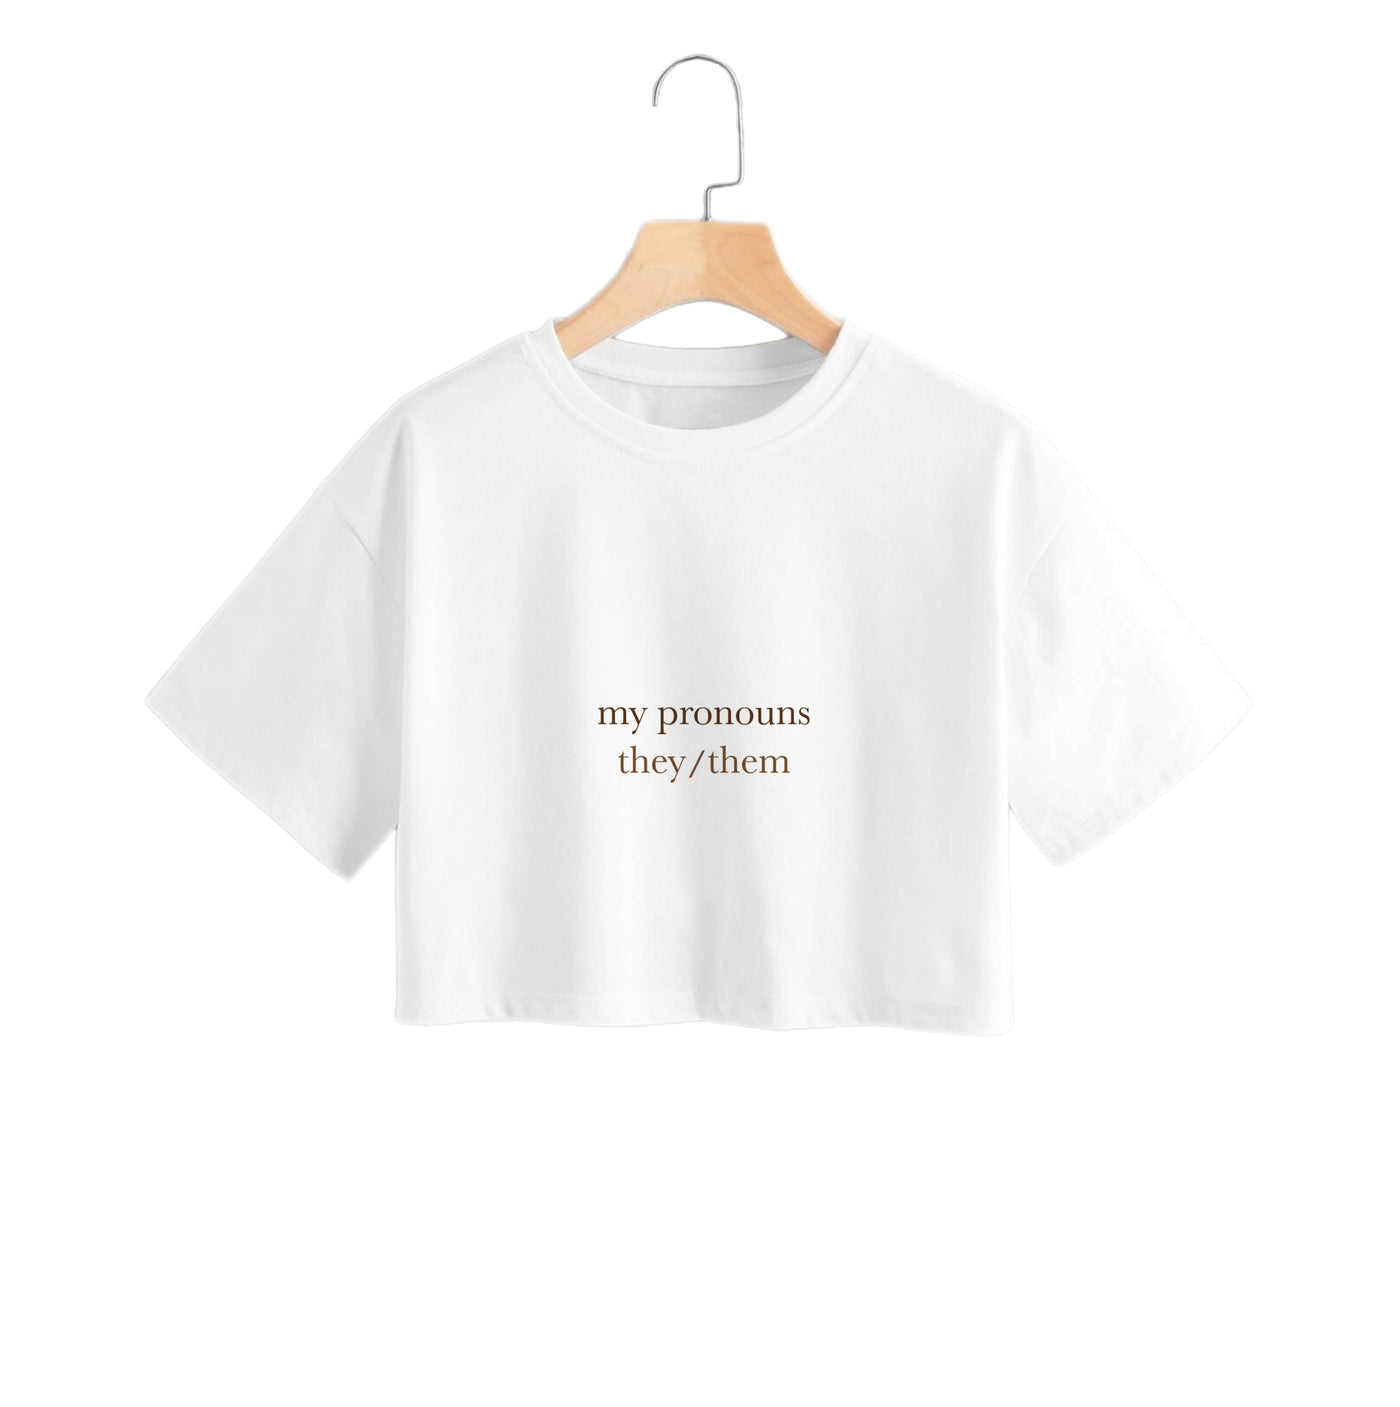 They & Them - Pronouns Crop Top